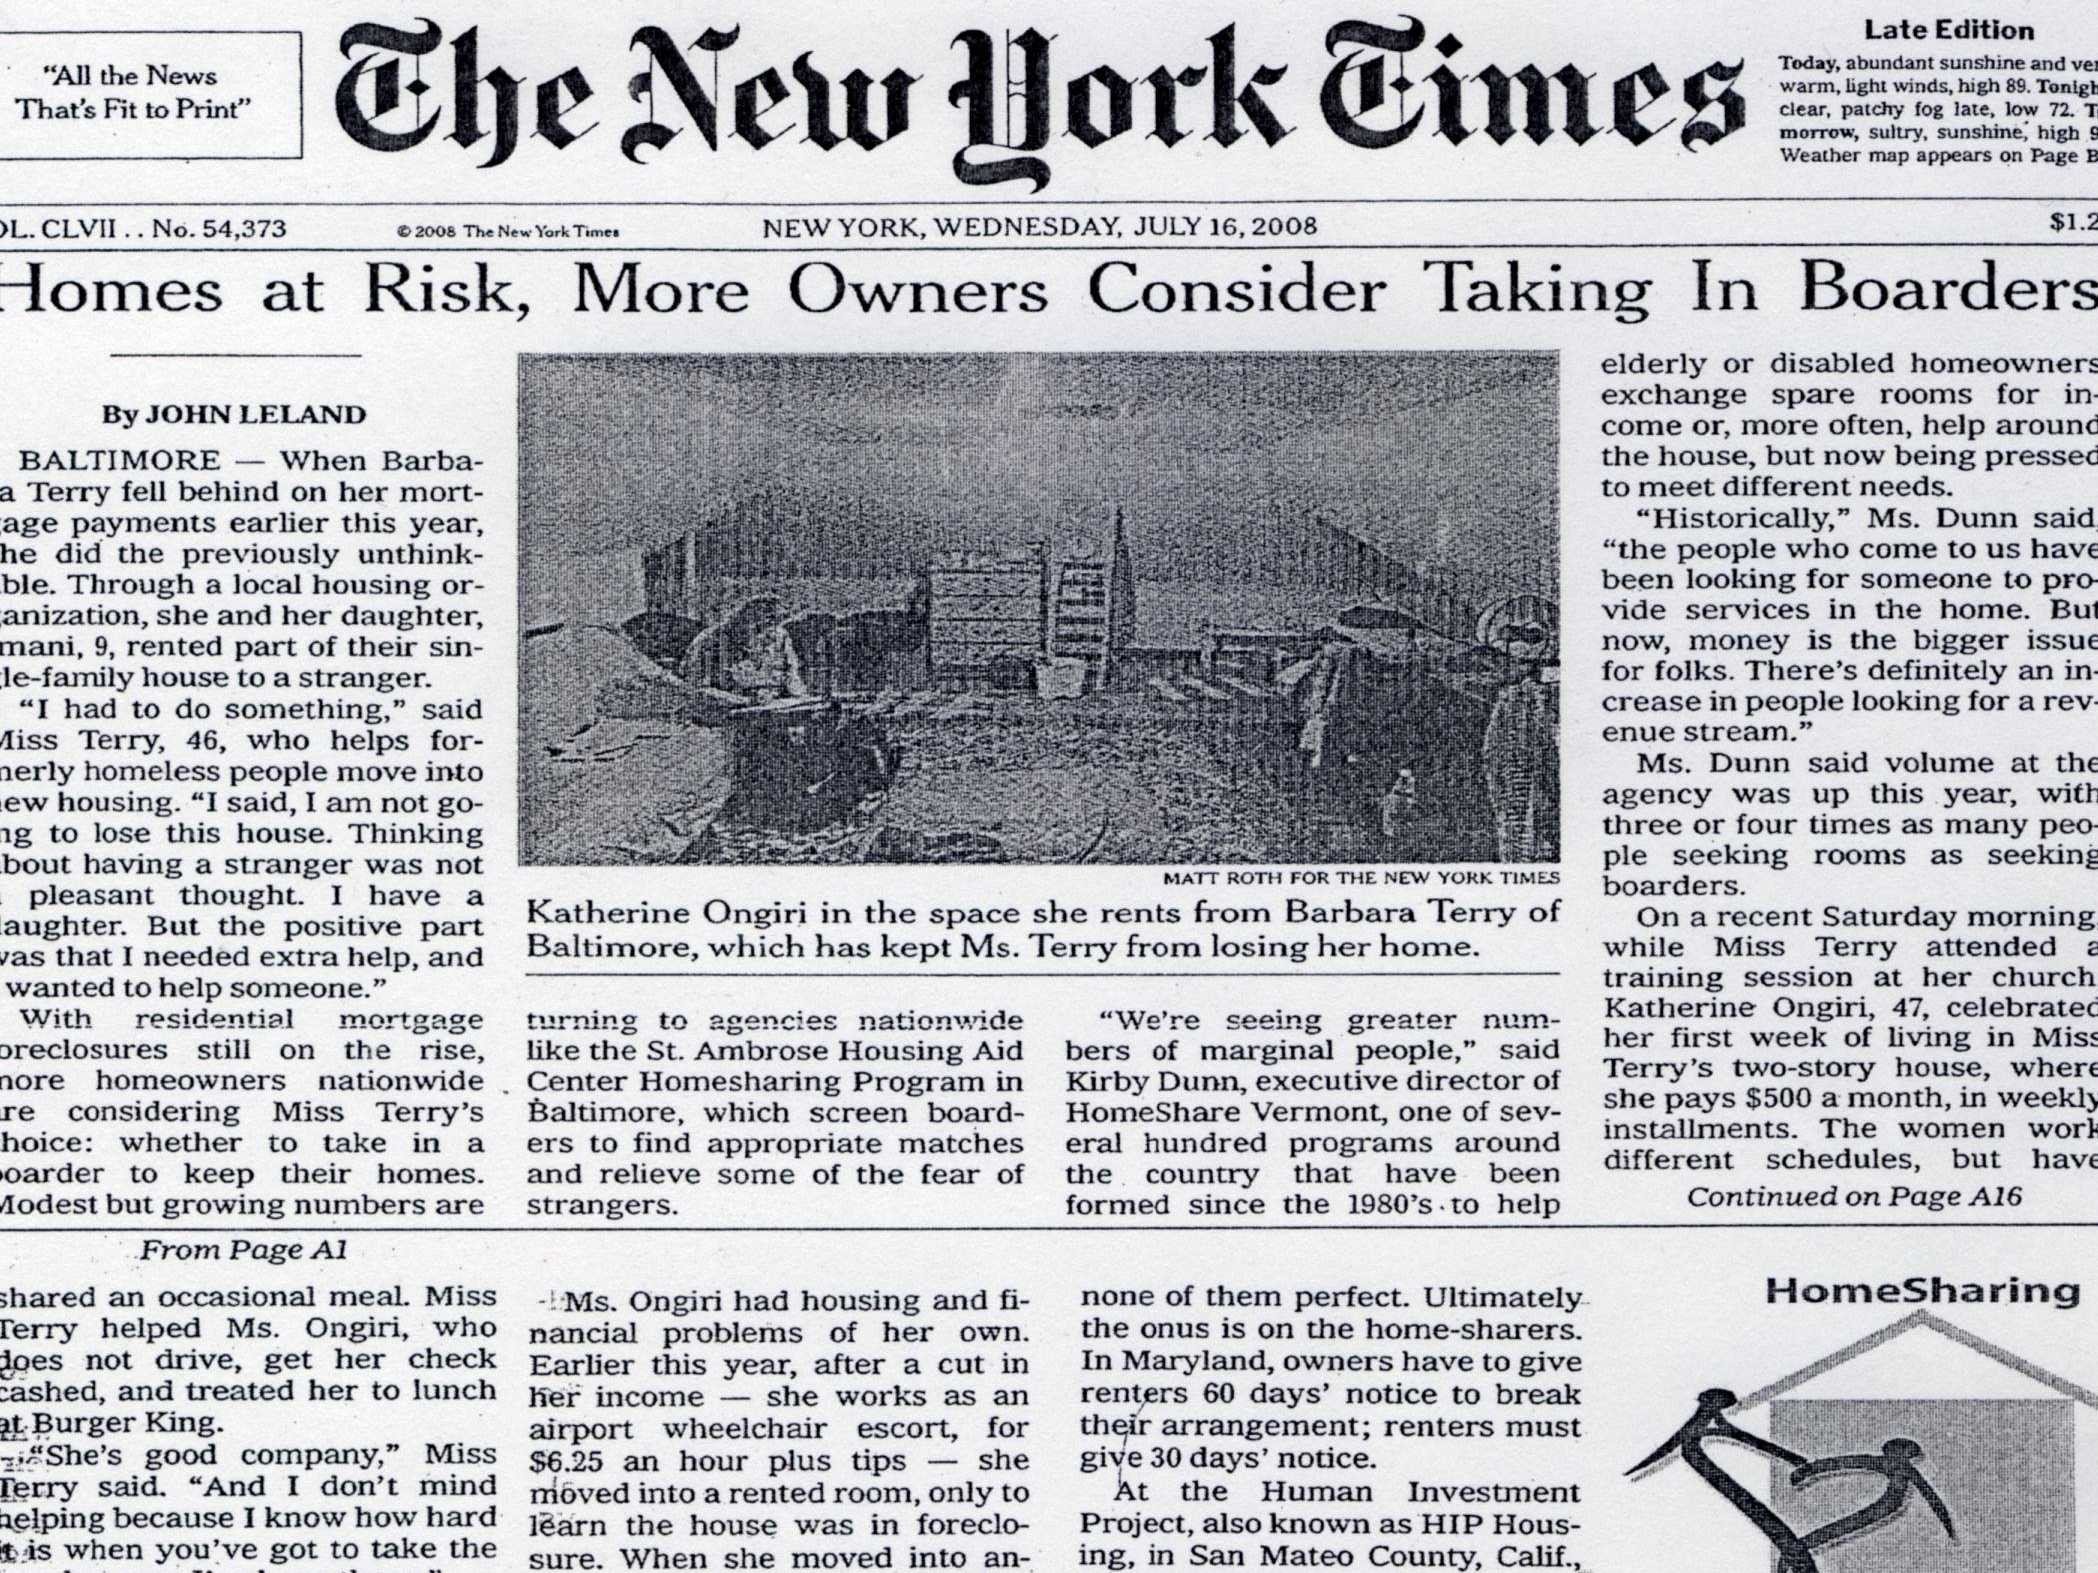 21 of The Old New York Times Template